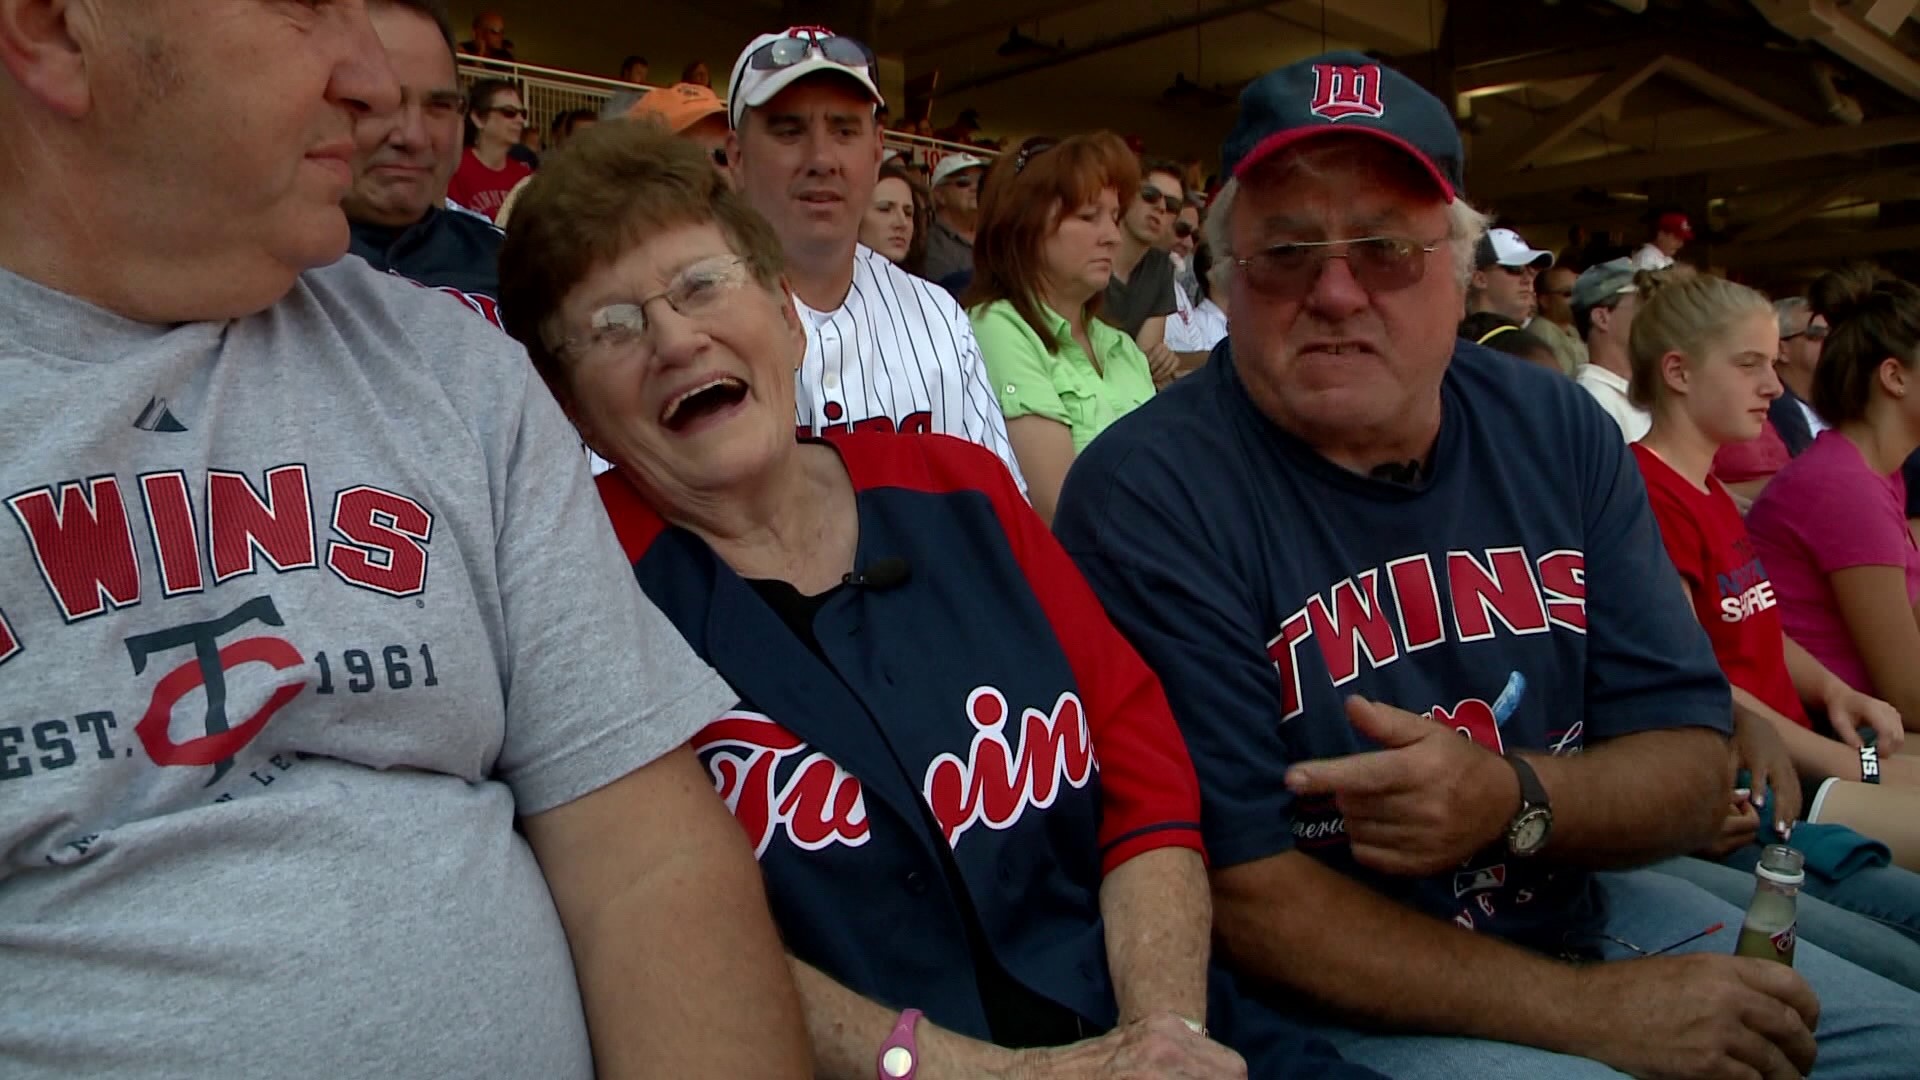 A very enthusiastic Boston Red Sox Fan -- Please credit